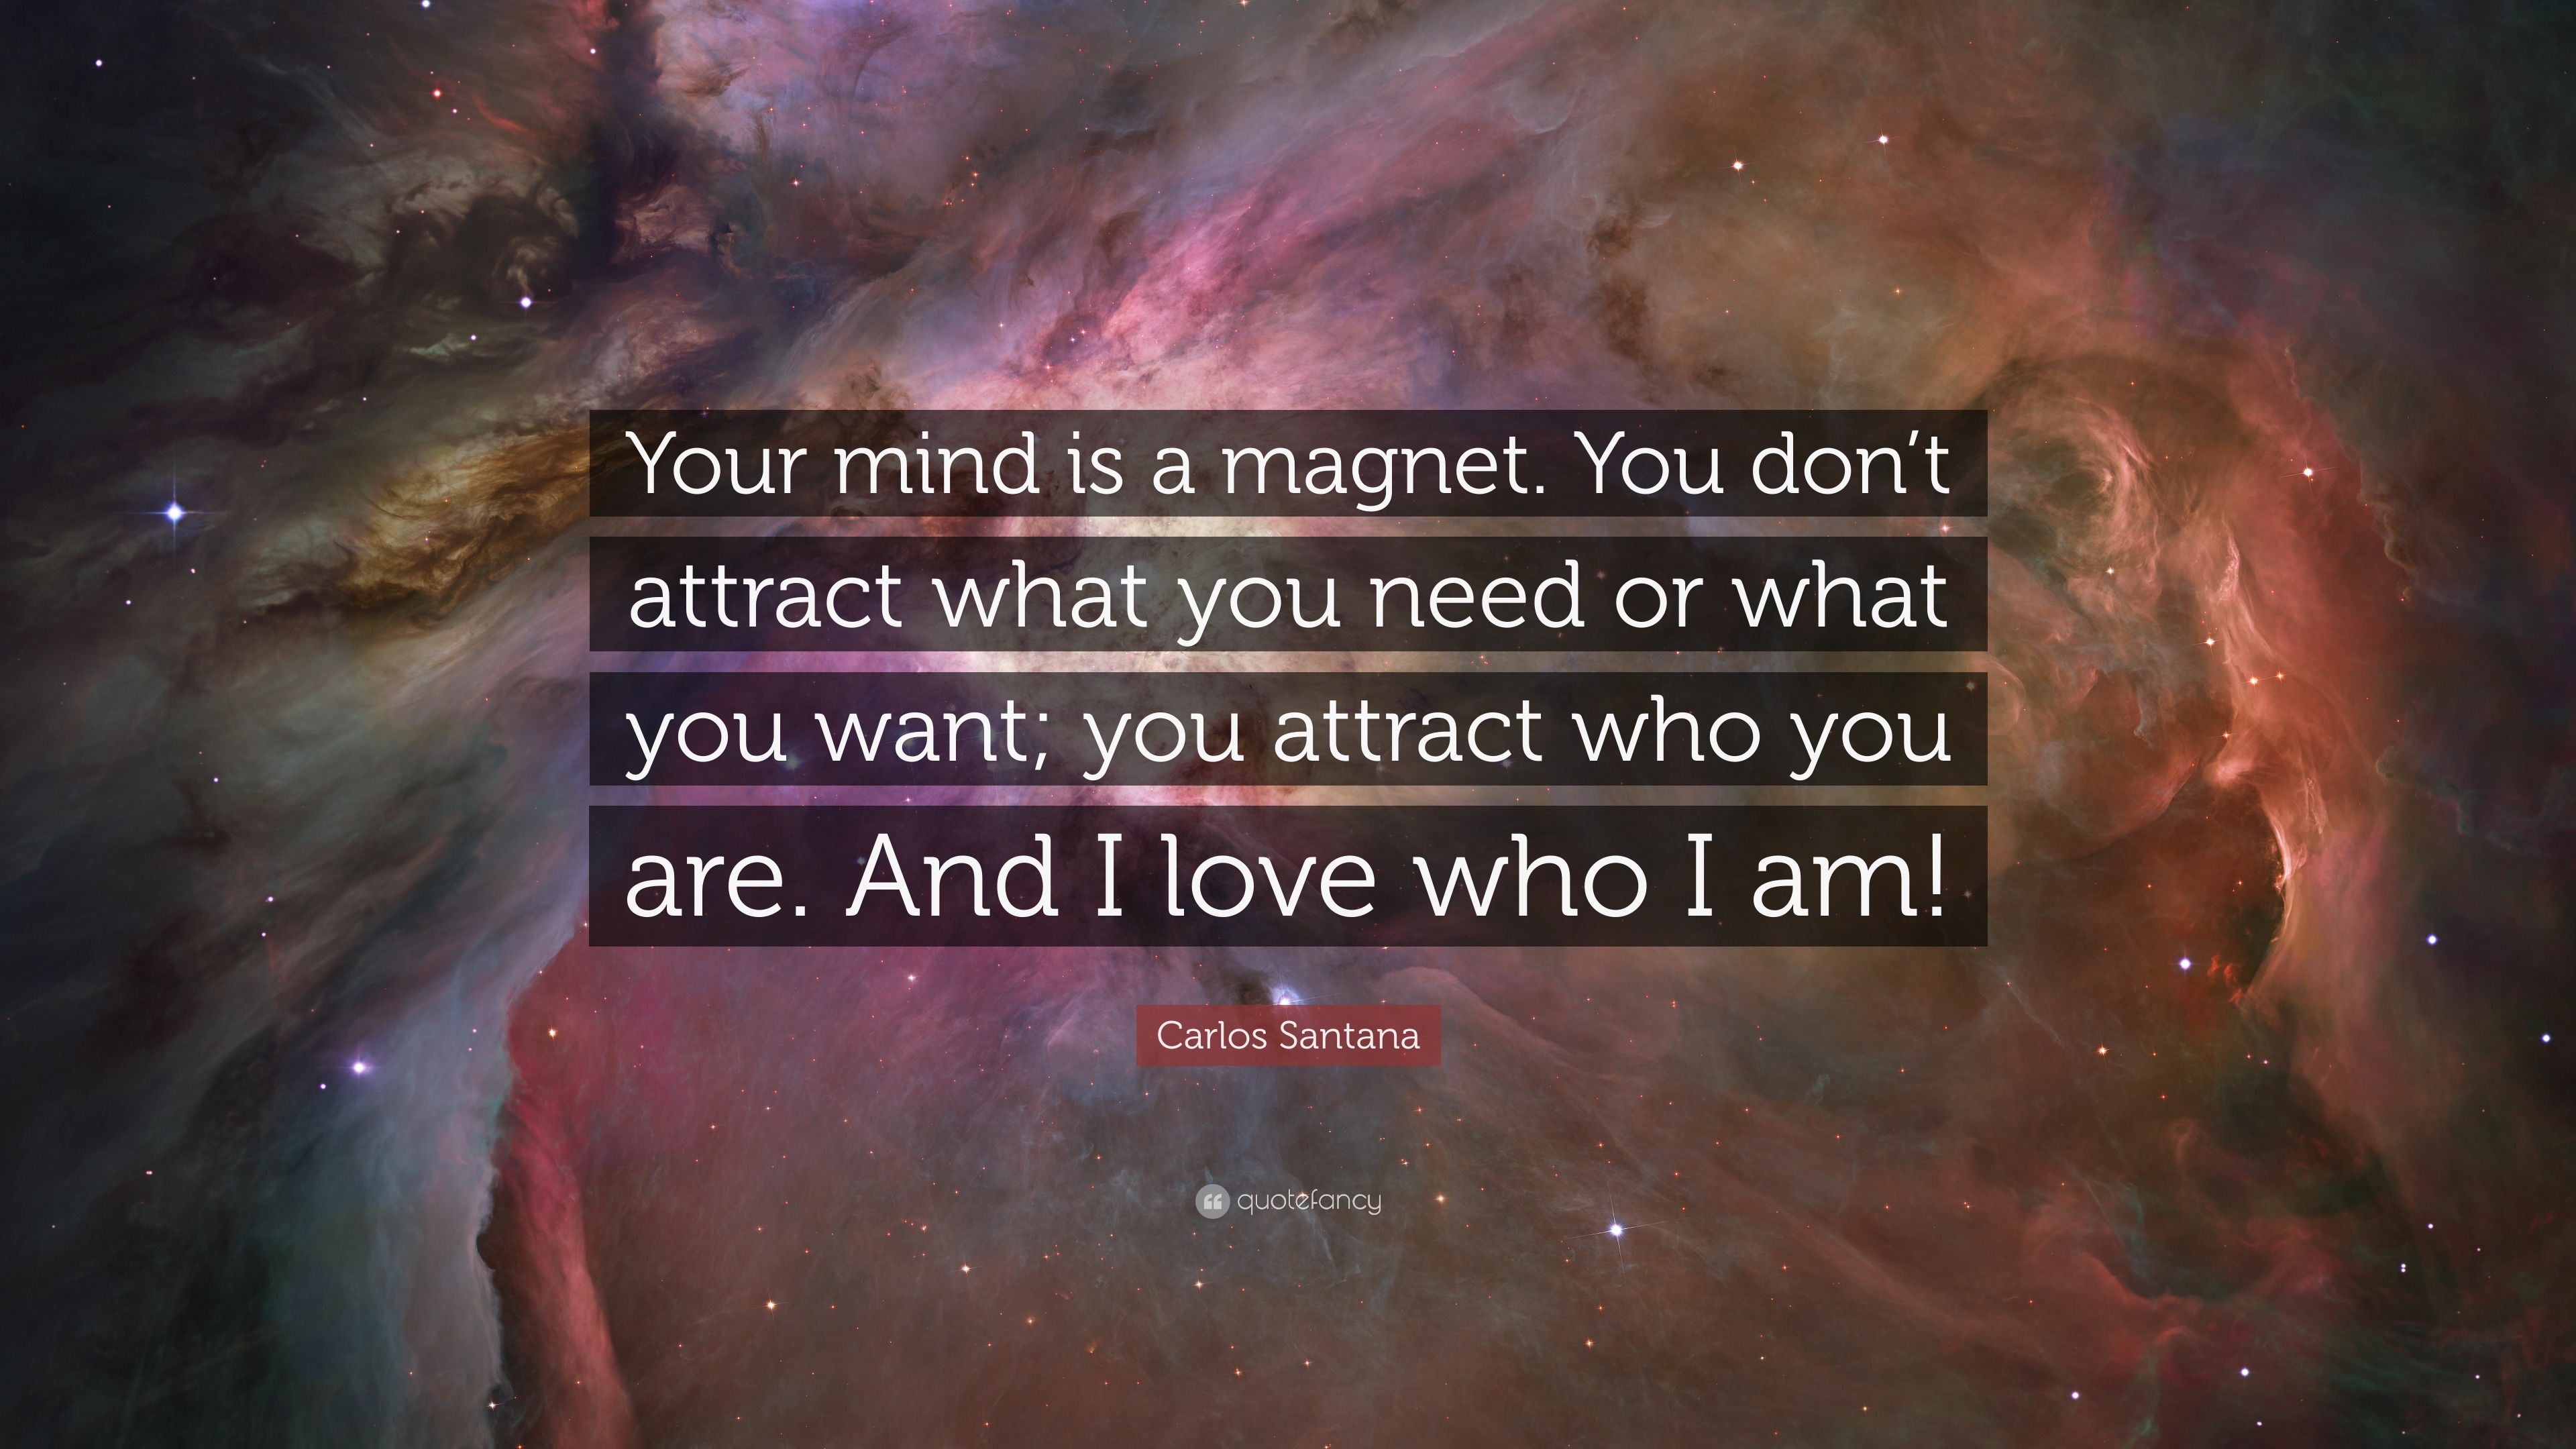 Santana Quote: “Your mind is a magnet. You don't attract you or